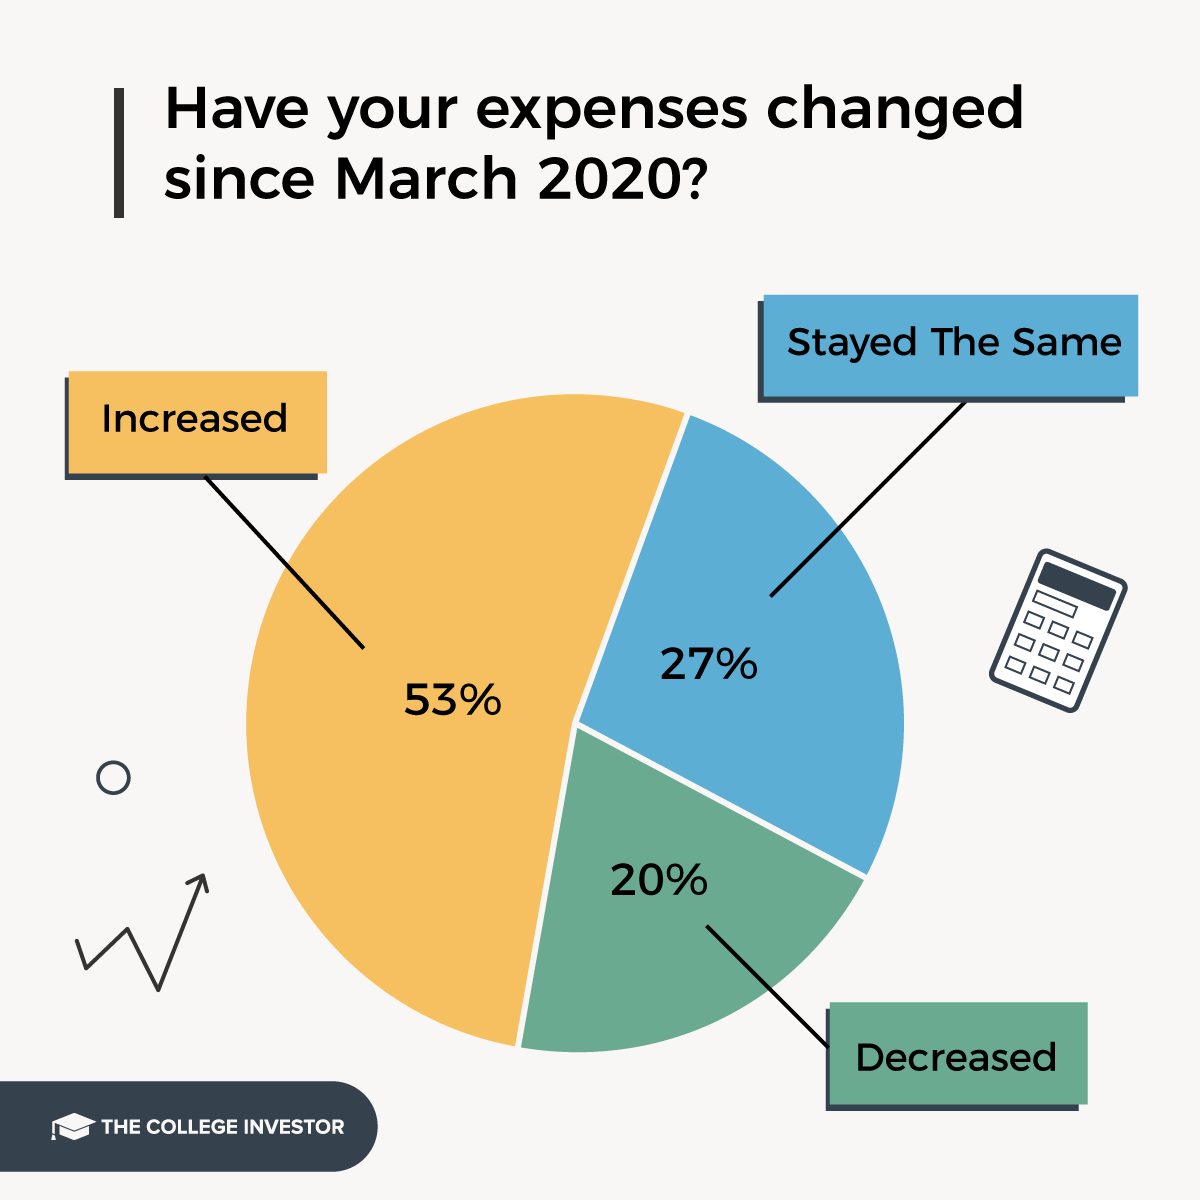 The majority of student loan borrowers have seen their expenses increase.